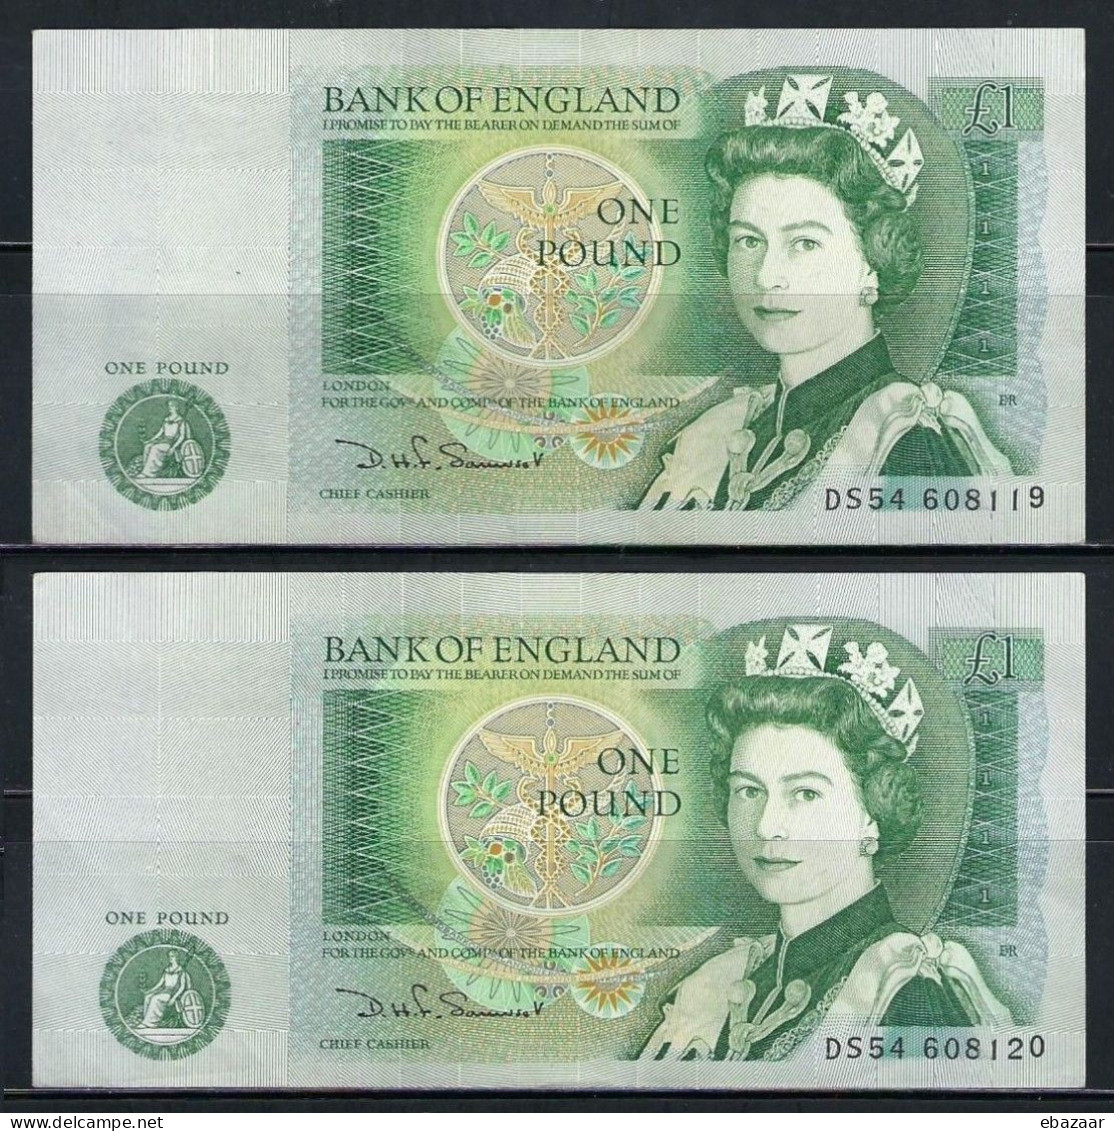 Great Britain Bank Of England 1 Pound Banknotes P-377b Consecutive Serial Numbers D. H. F. Somerset 1978-1984 UNC - 1 Pond